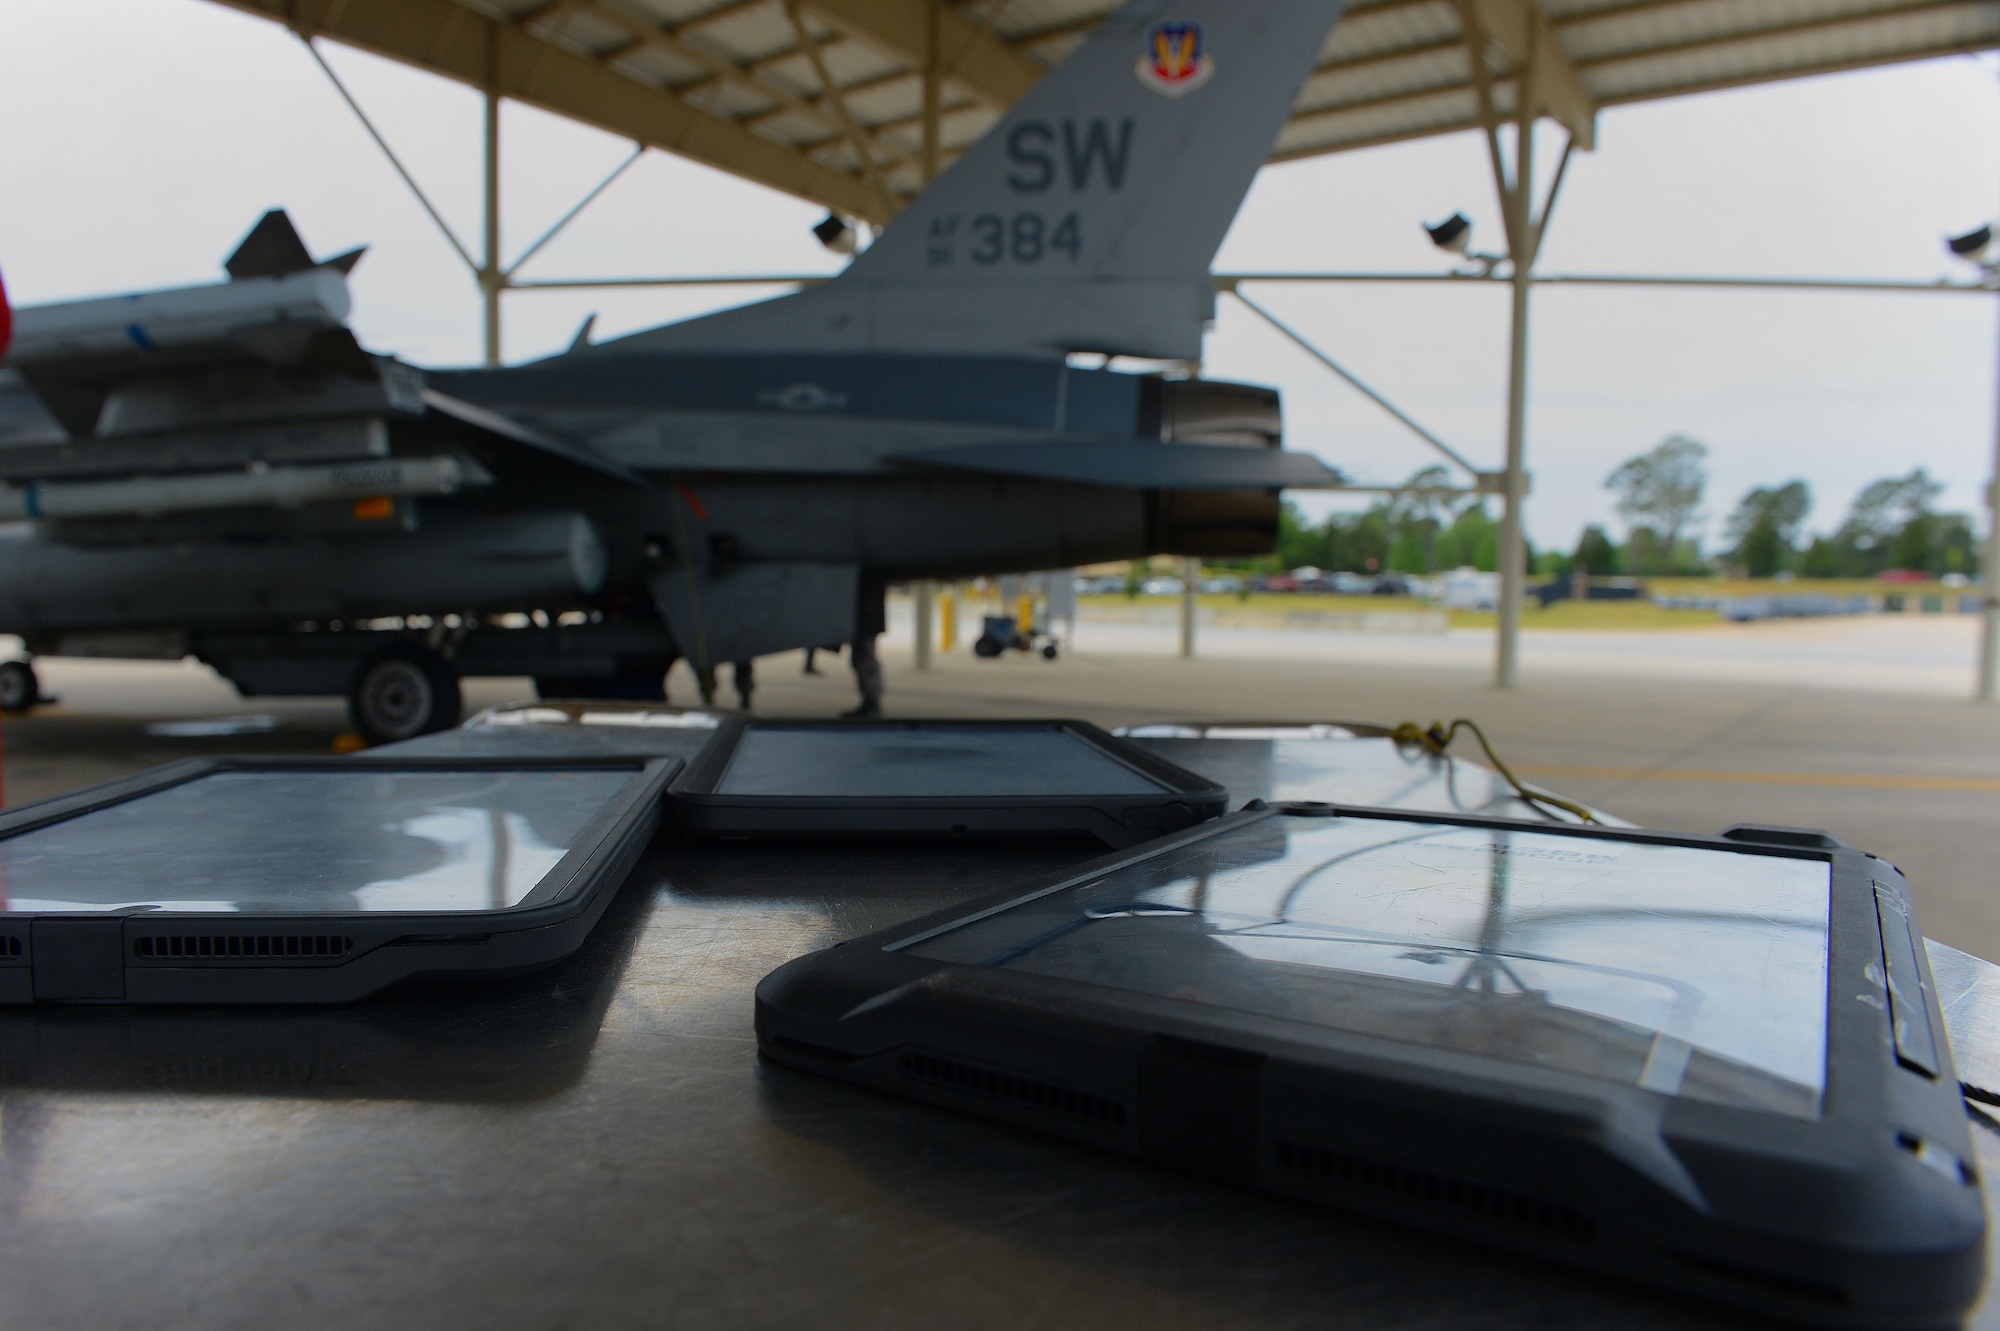 iPad versions of technical order manuals sit on a toolbox next to an F-16CJ Fighting Falcon at Shaw Air Force Base, S.C., April 29, 2014. Maintainers assigned to the 20th Aircraft Maintenance Squadron, 55th Aircraft Maintenance Unit were selected to test the durability and user capabilities of the new platform in comparison to older versions of the technical order manuals. (U.S. Air Force photo by Airman 1st Class Jensen Stidham/Released)